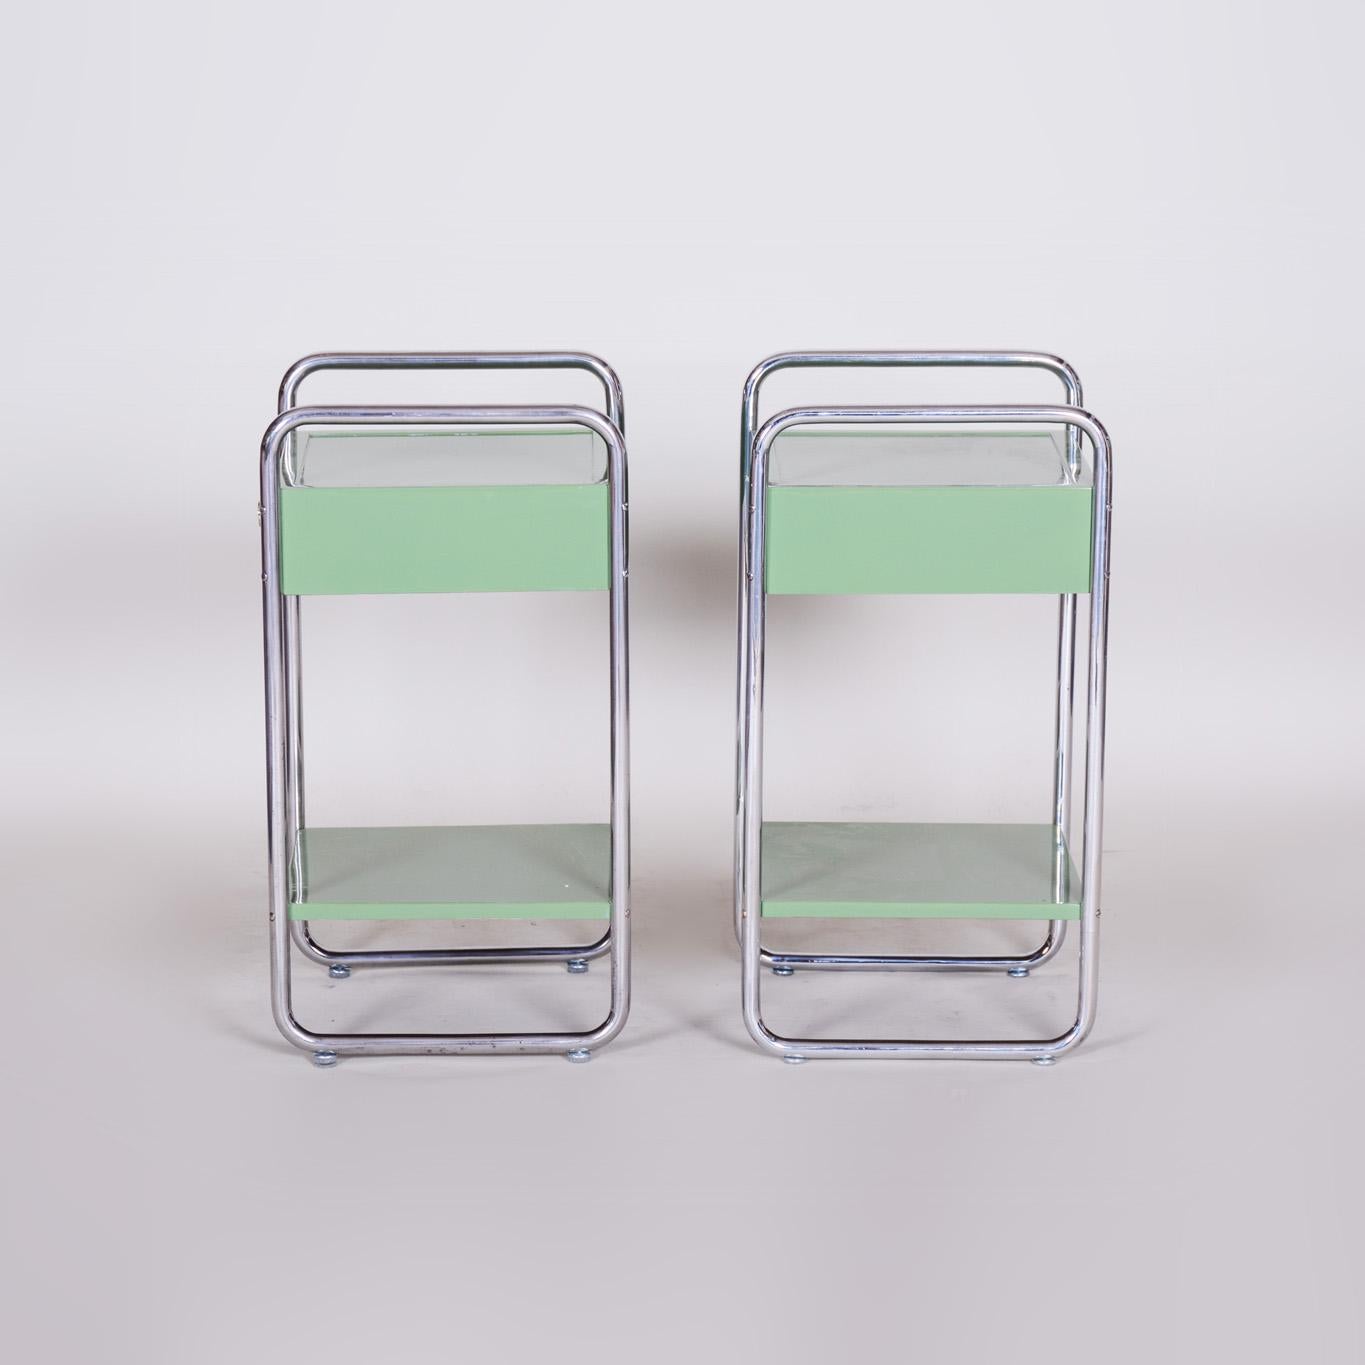 Restored Bauhaus Pair of Bed-Side Tables, Chrome-Plated Steel, Czech, 1930s For Sale 3